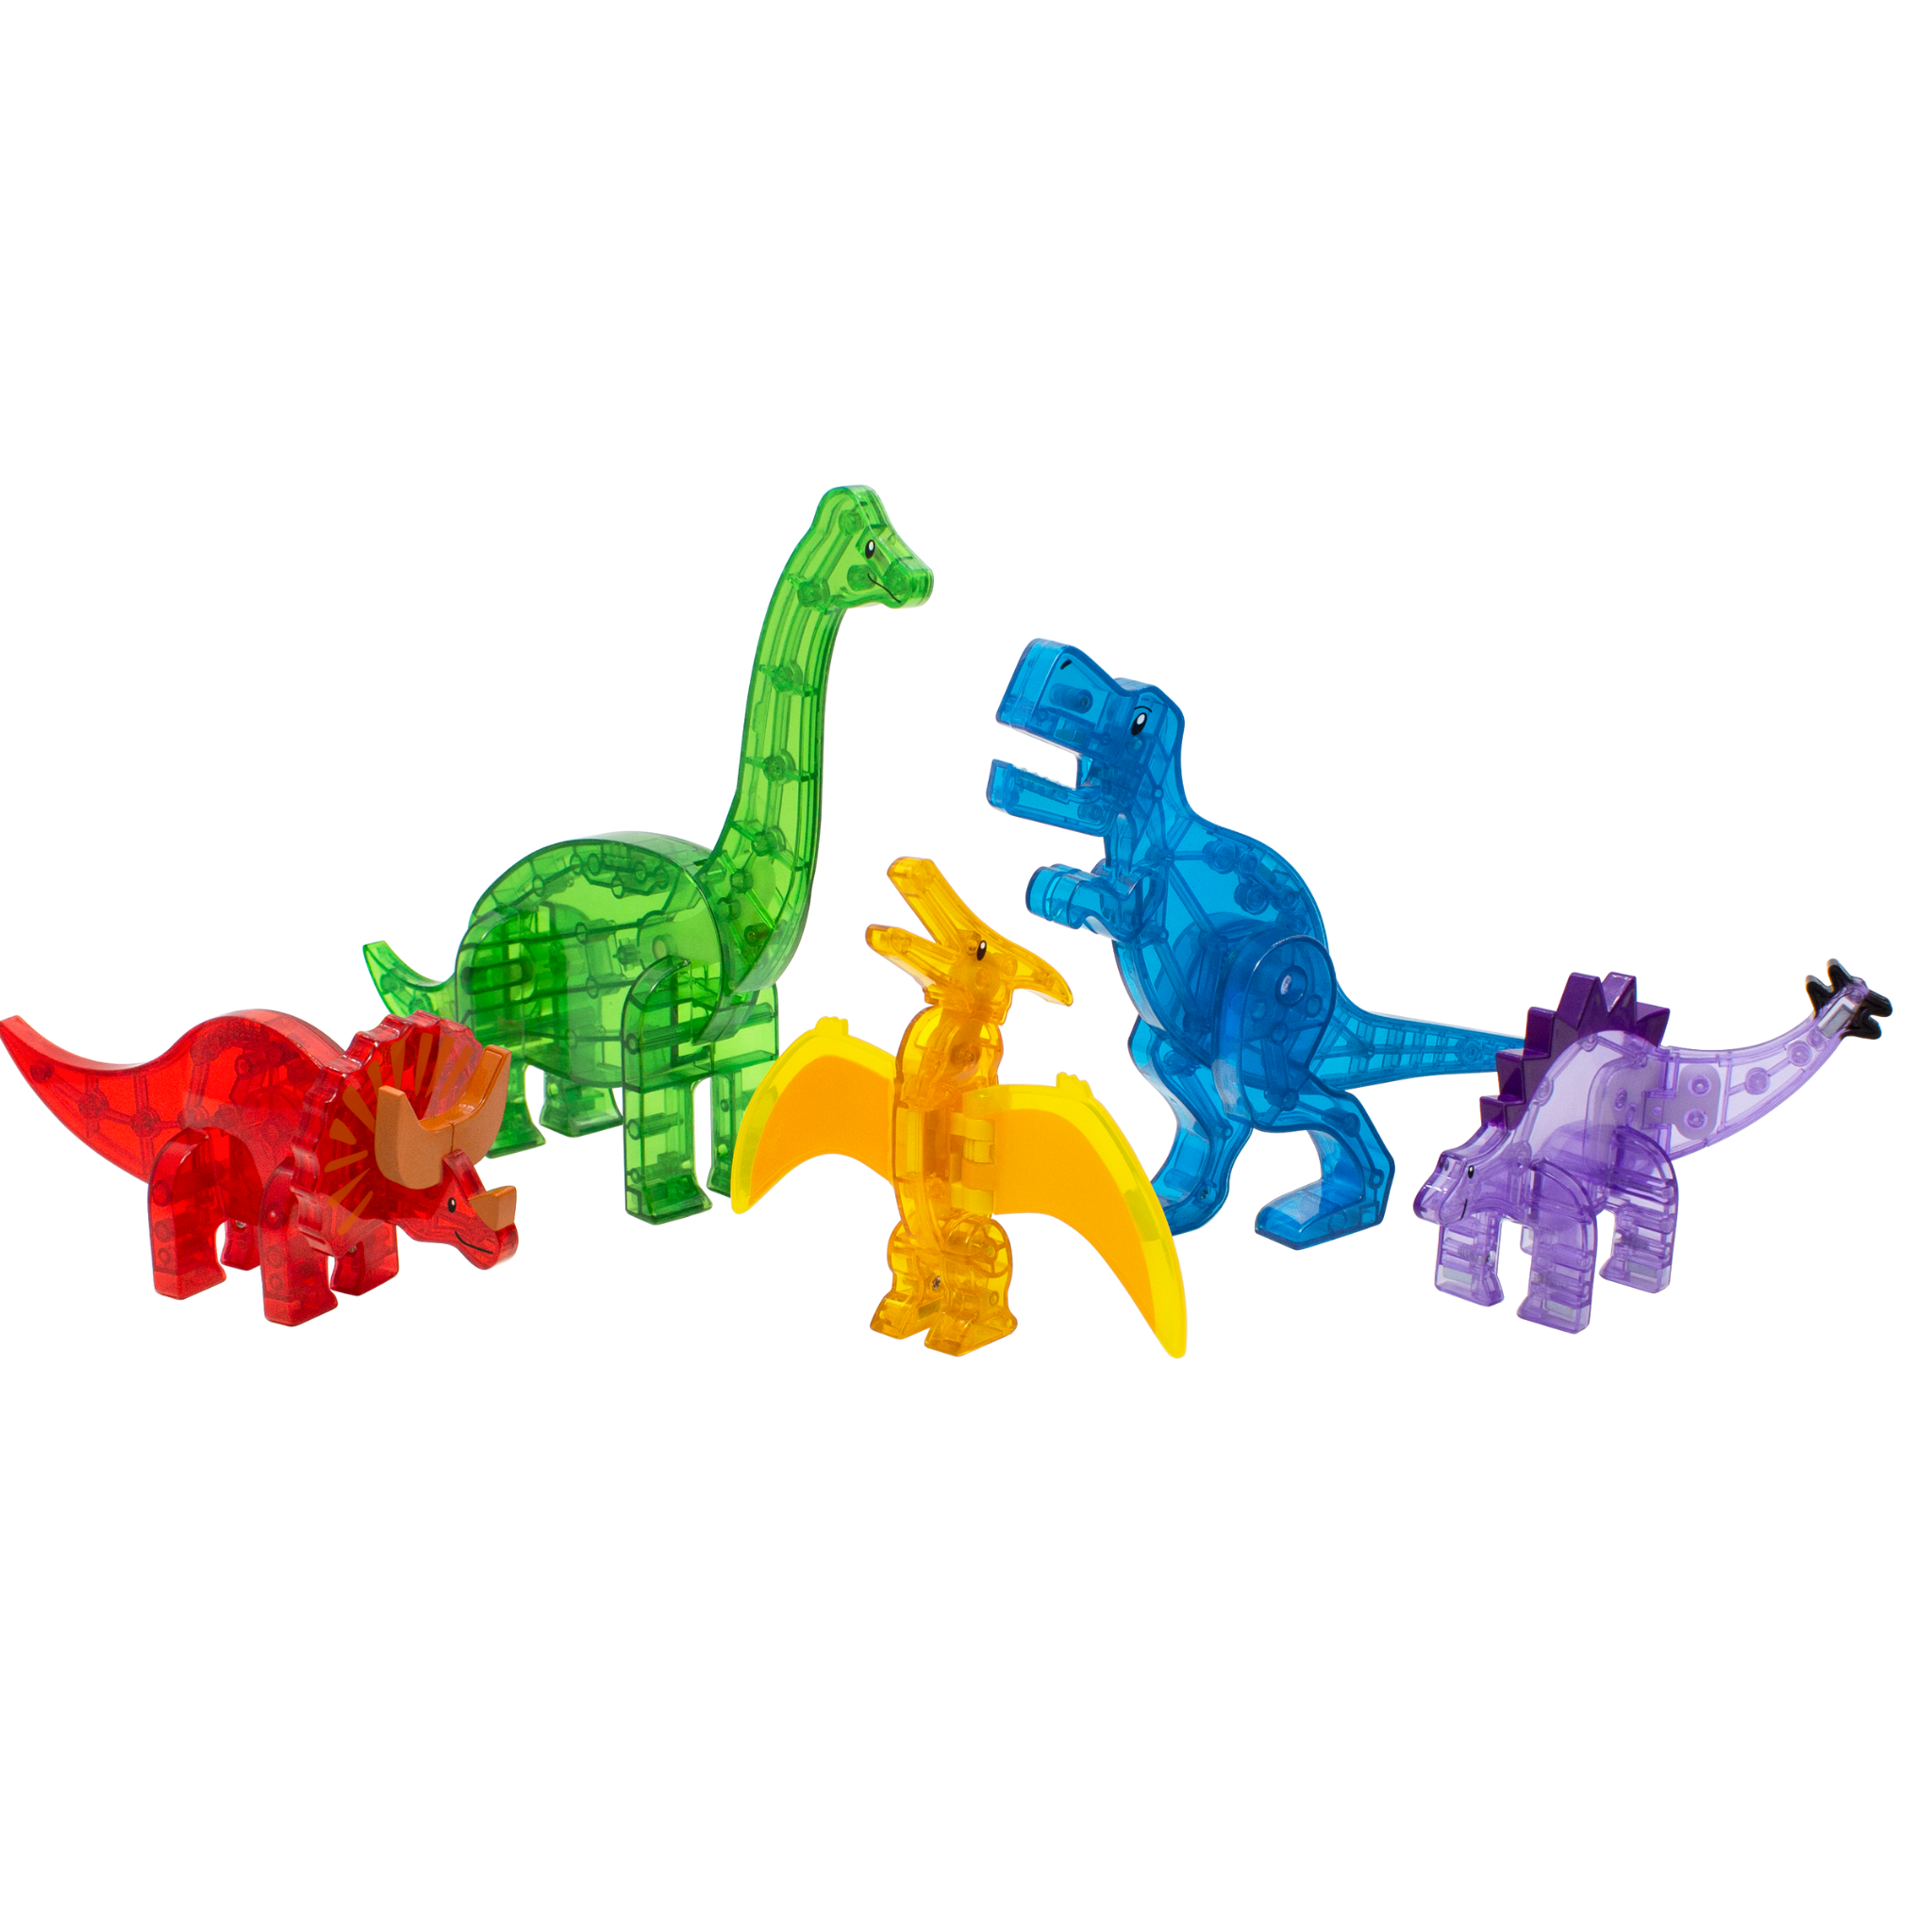 https://www.magnatiles.com/wp-content/uploads/2022/06/Dinos-Product-Listing-1.png